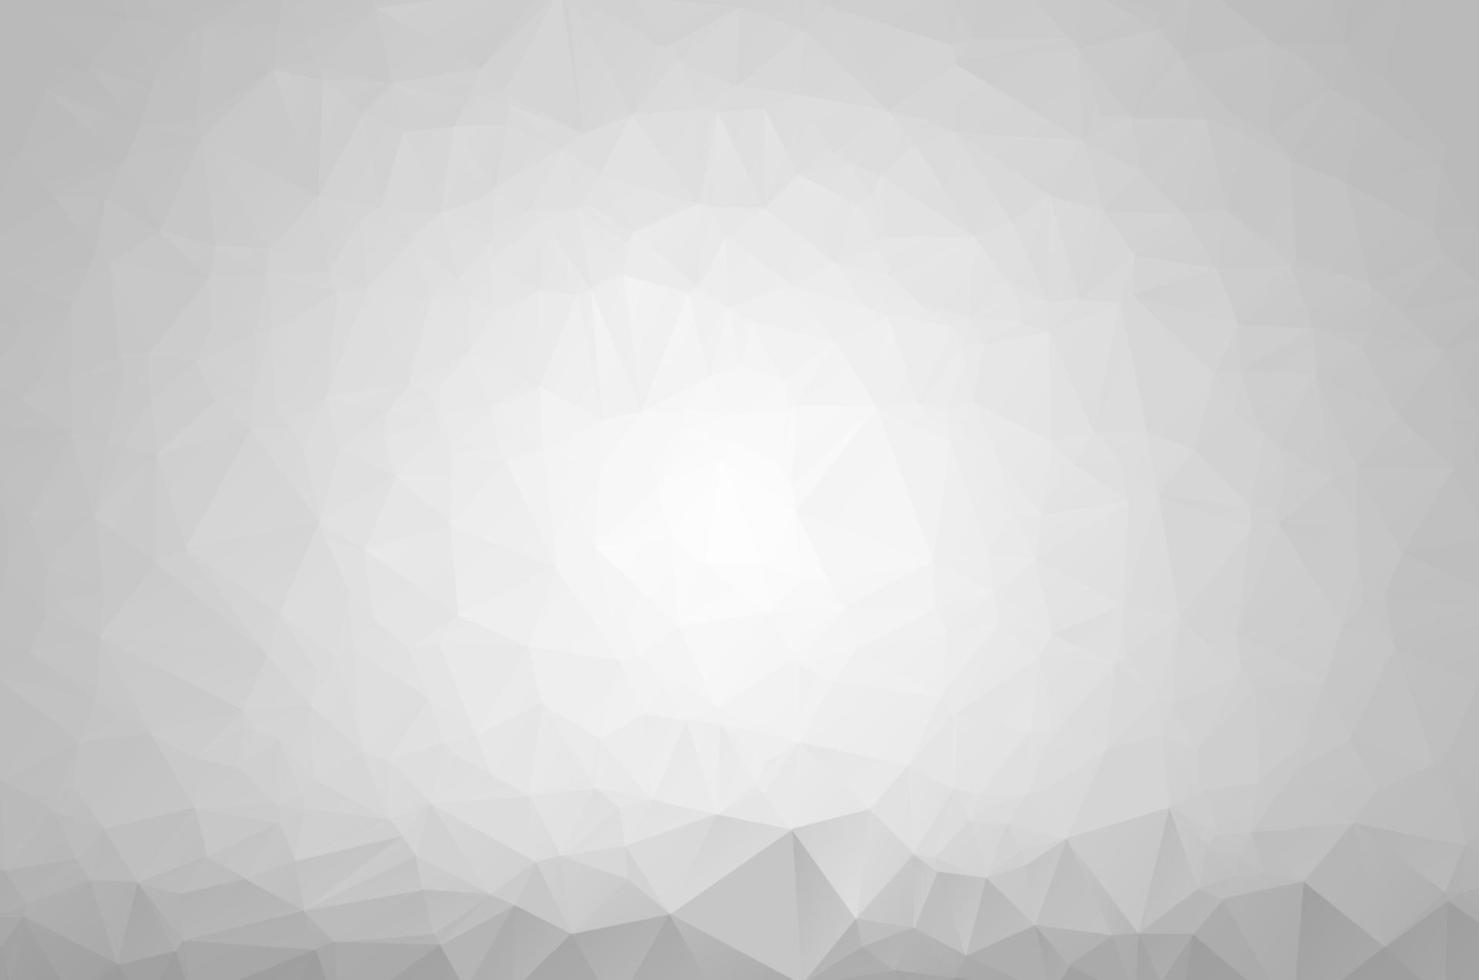 White Grey Low poly crystal background. Polygon design pattern. environment green Low poly vector illustration, low polygon background.